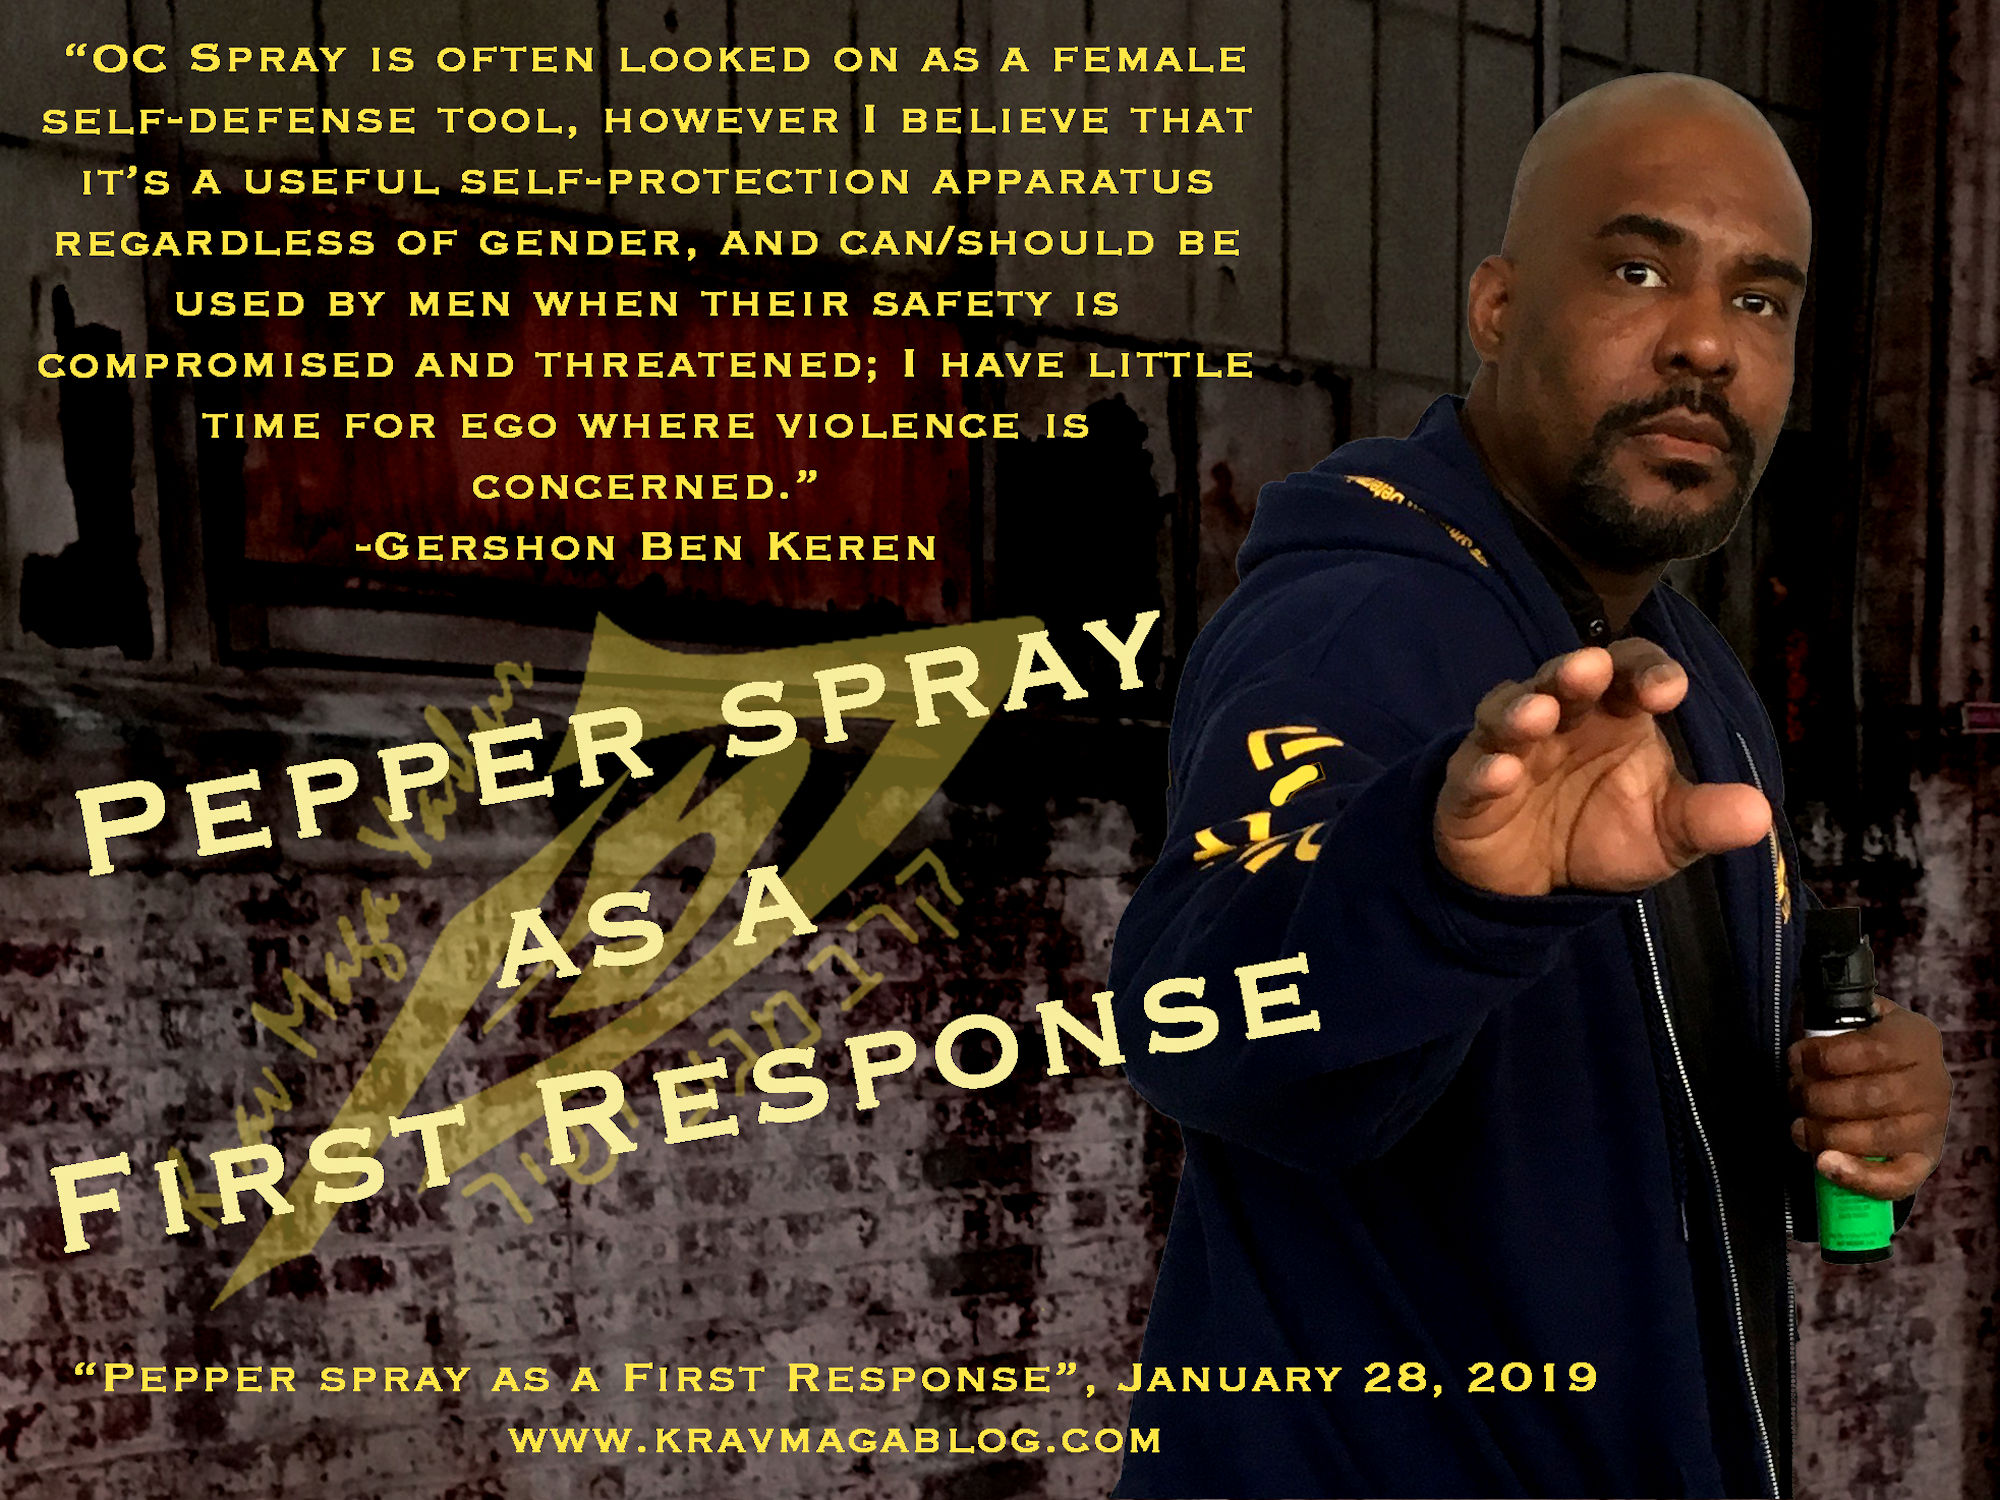 Blog About Pepper Spray As A First Response